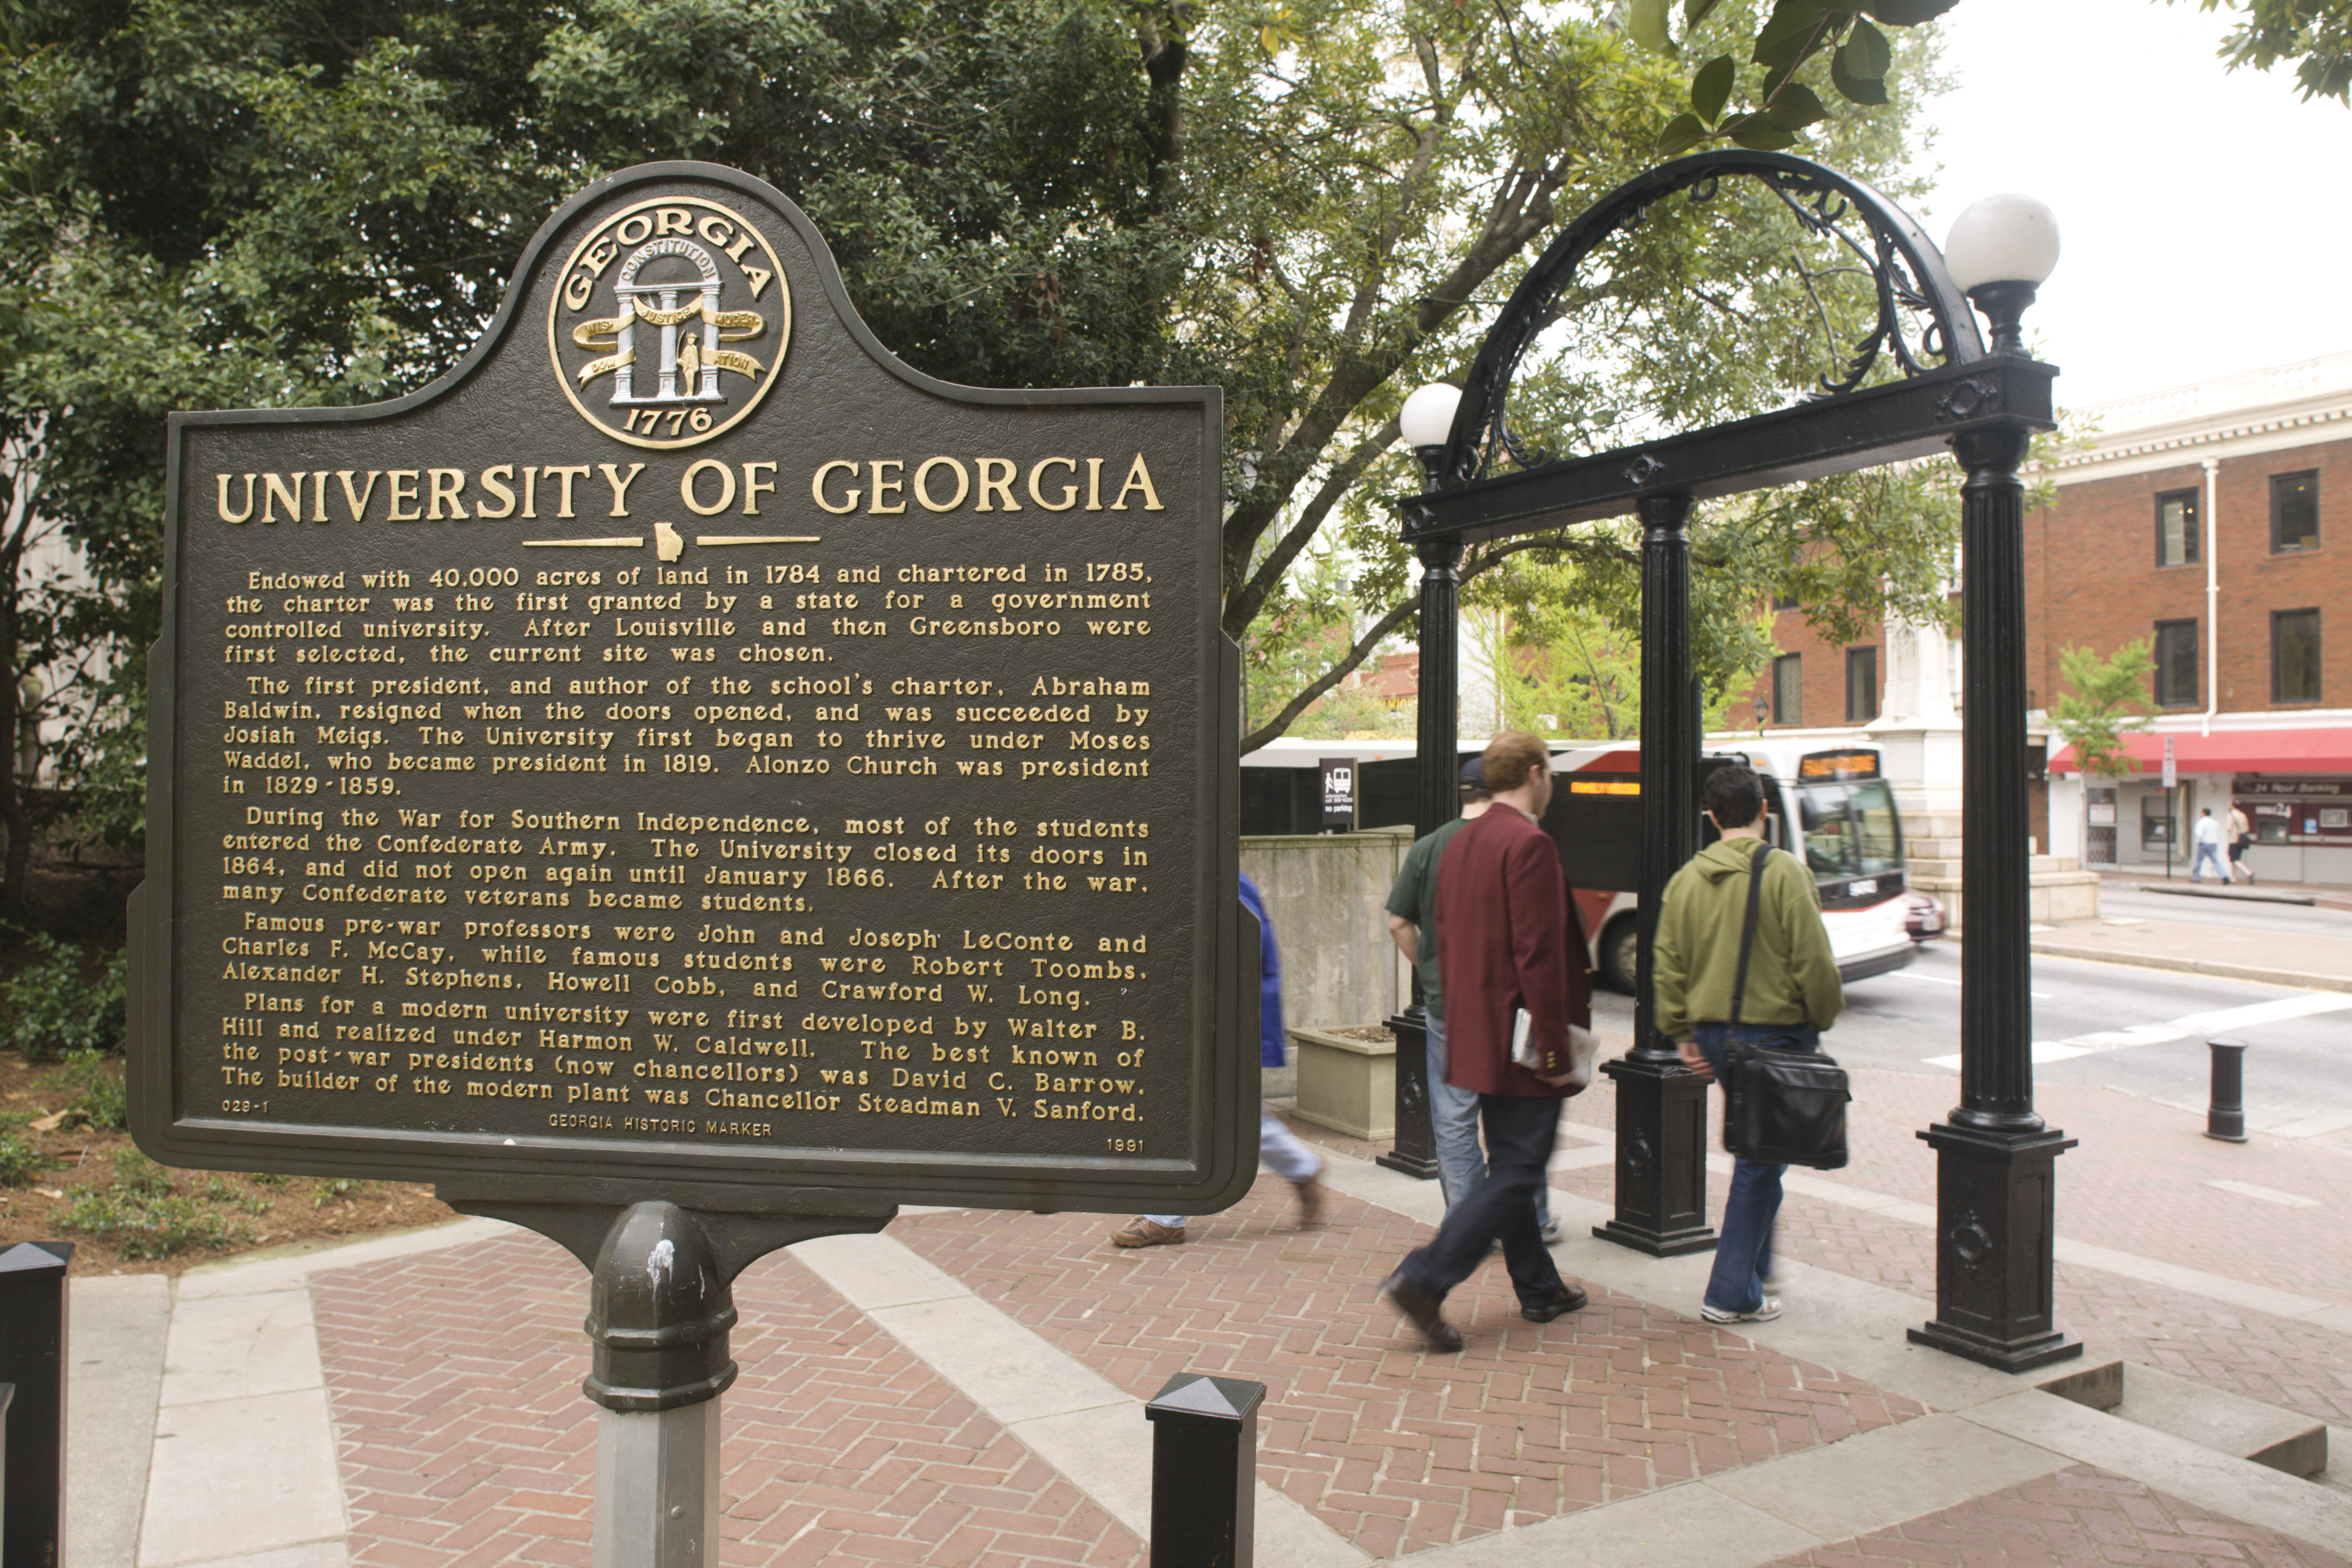 University of Georgia historic marker and Arch